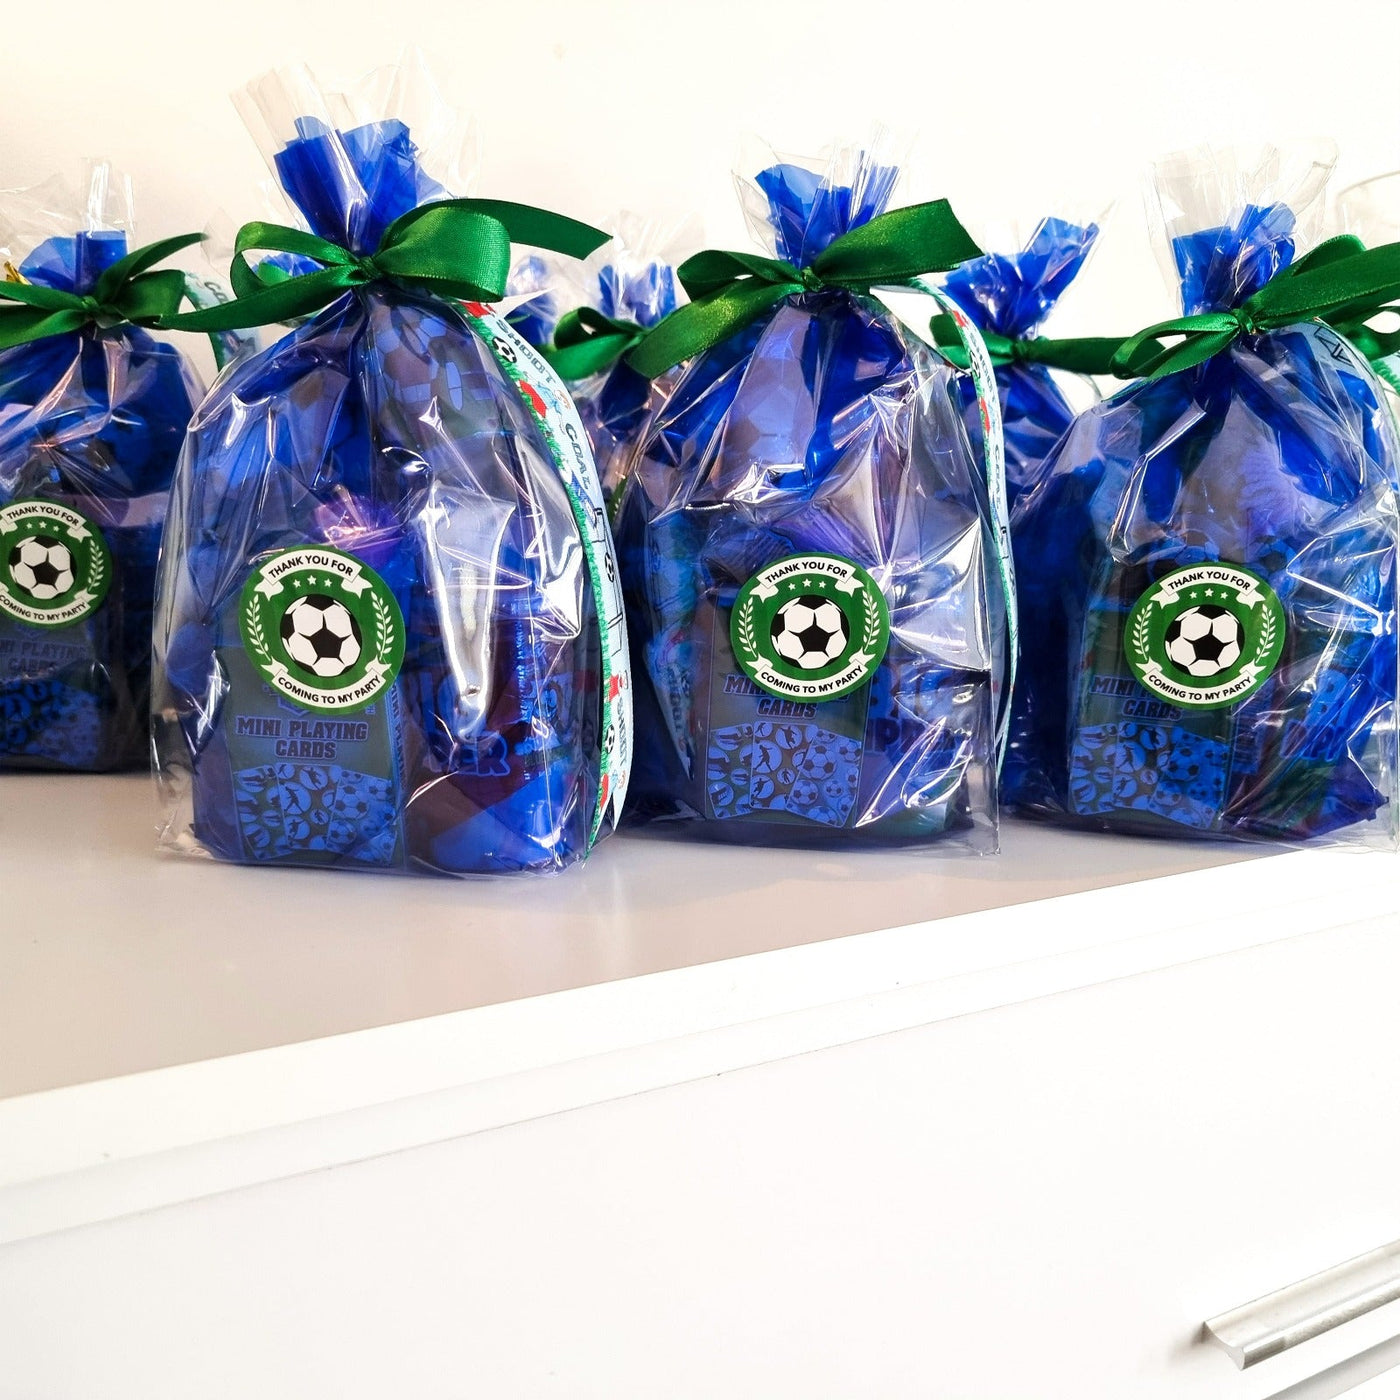 Pre-filled Blue Football Party Bags For Children. Party Favours With Football Sweets And Toys.